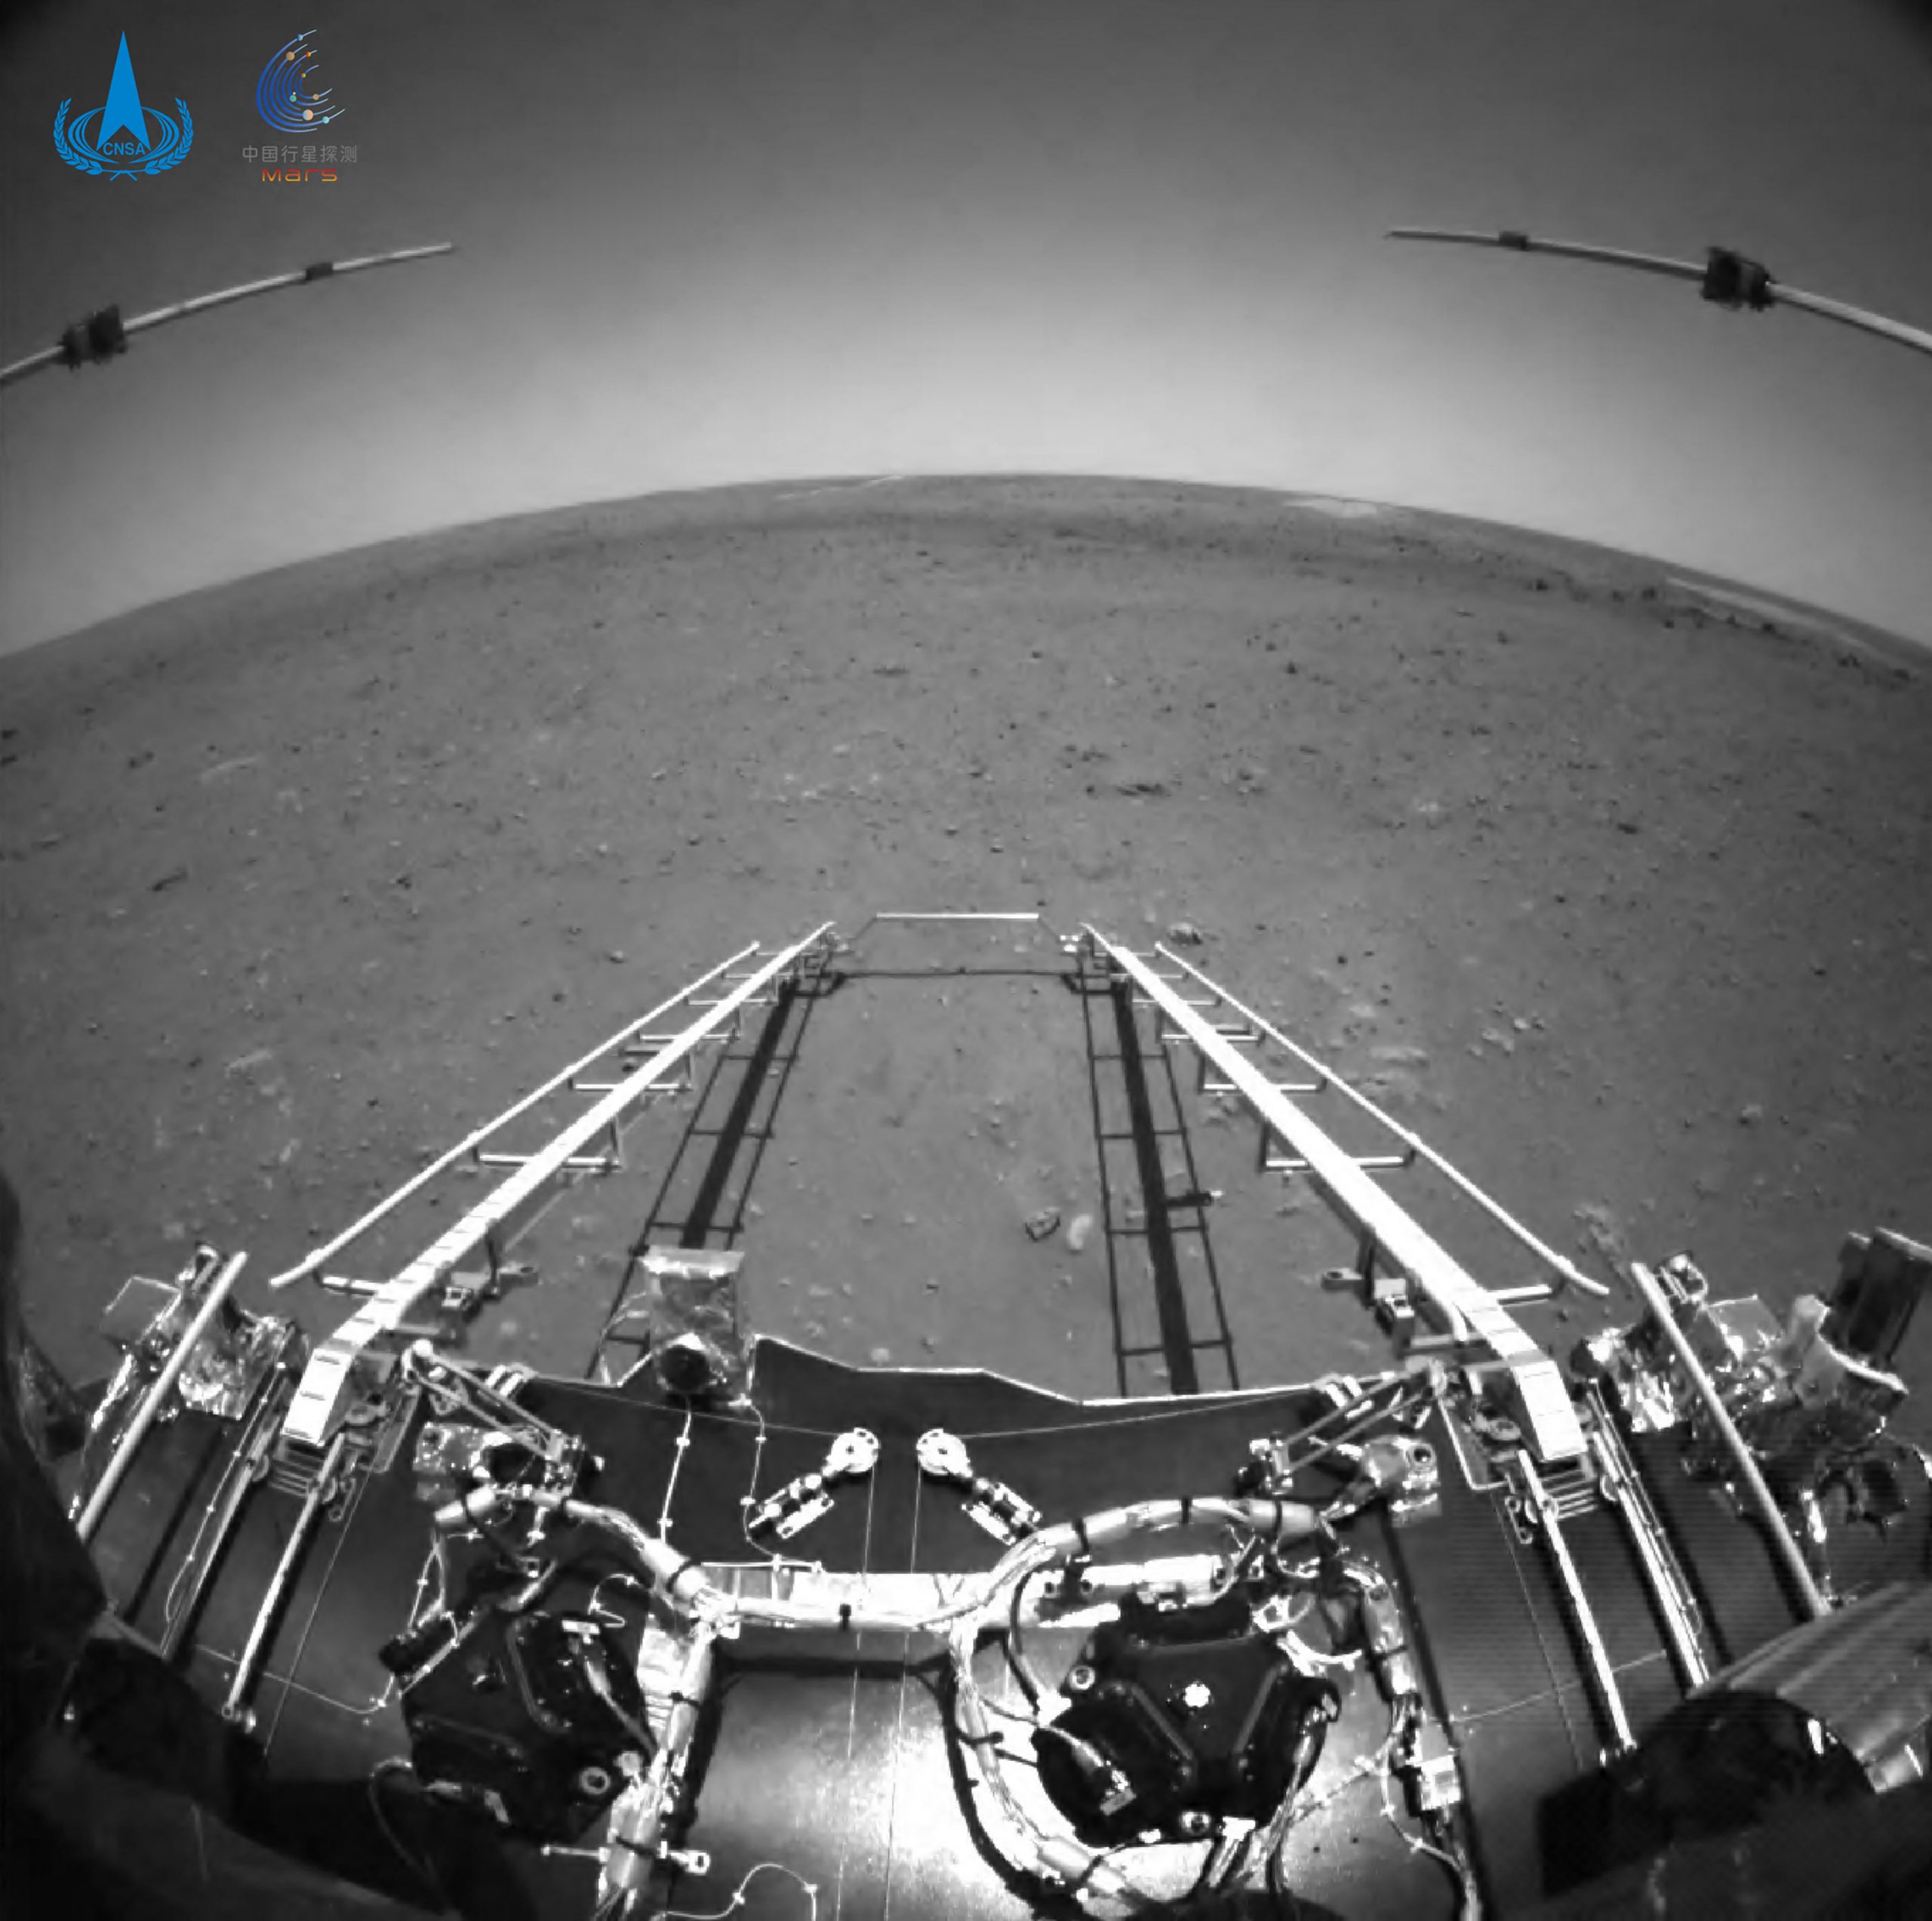 Photos posted by the Chinese Martian